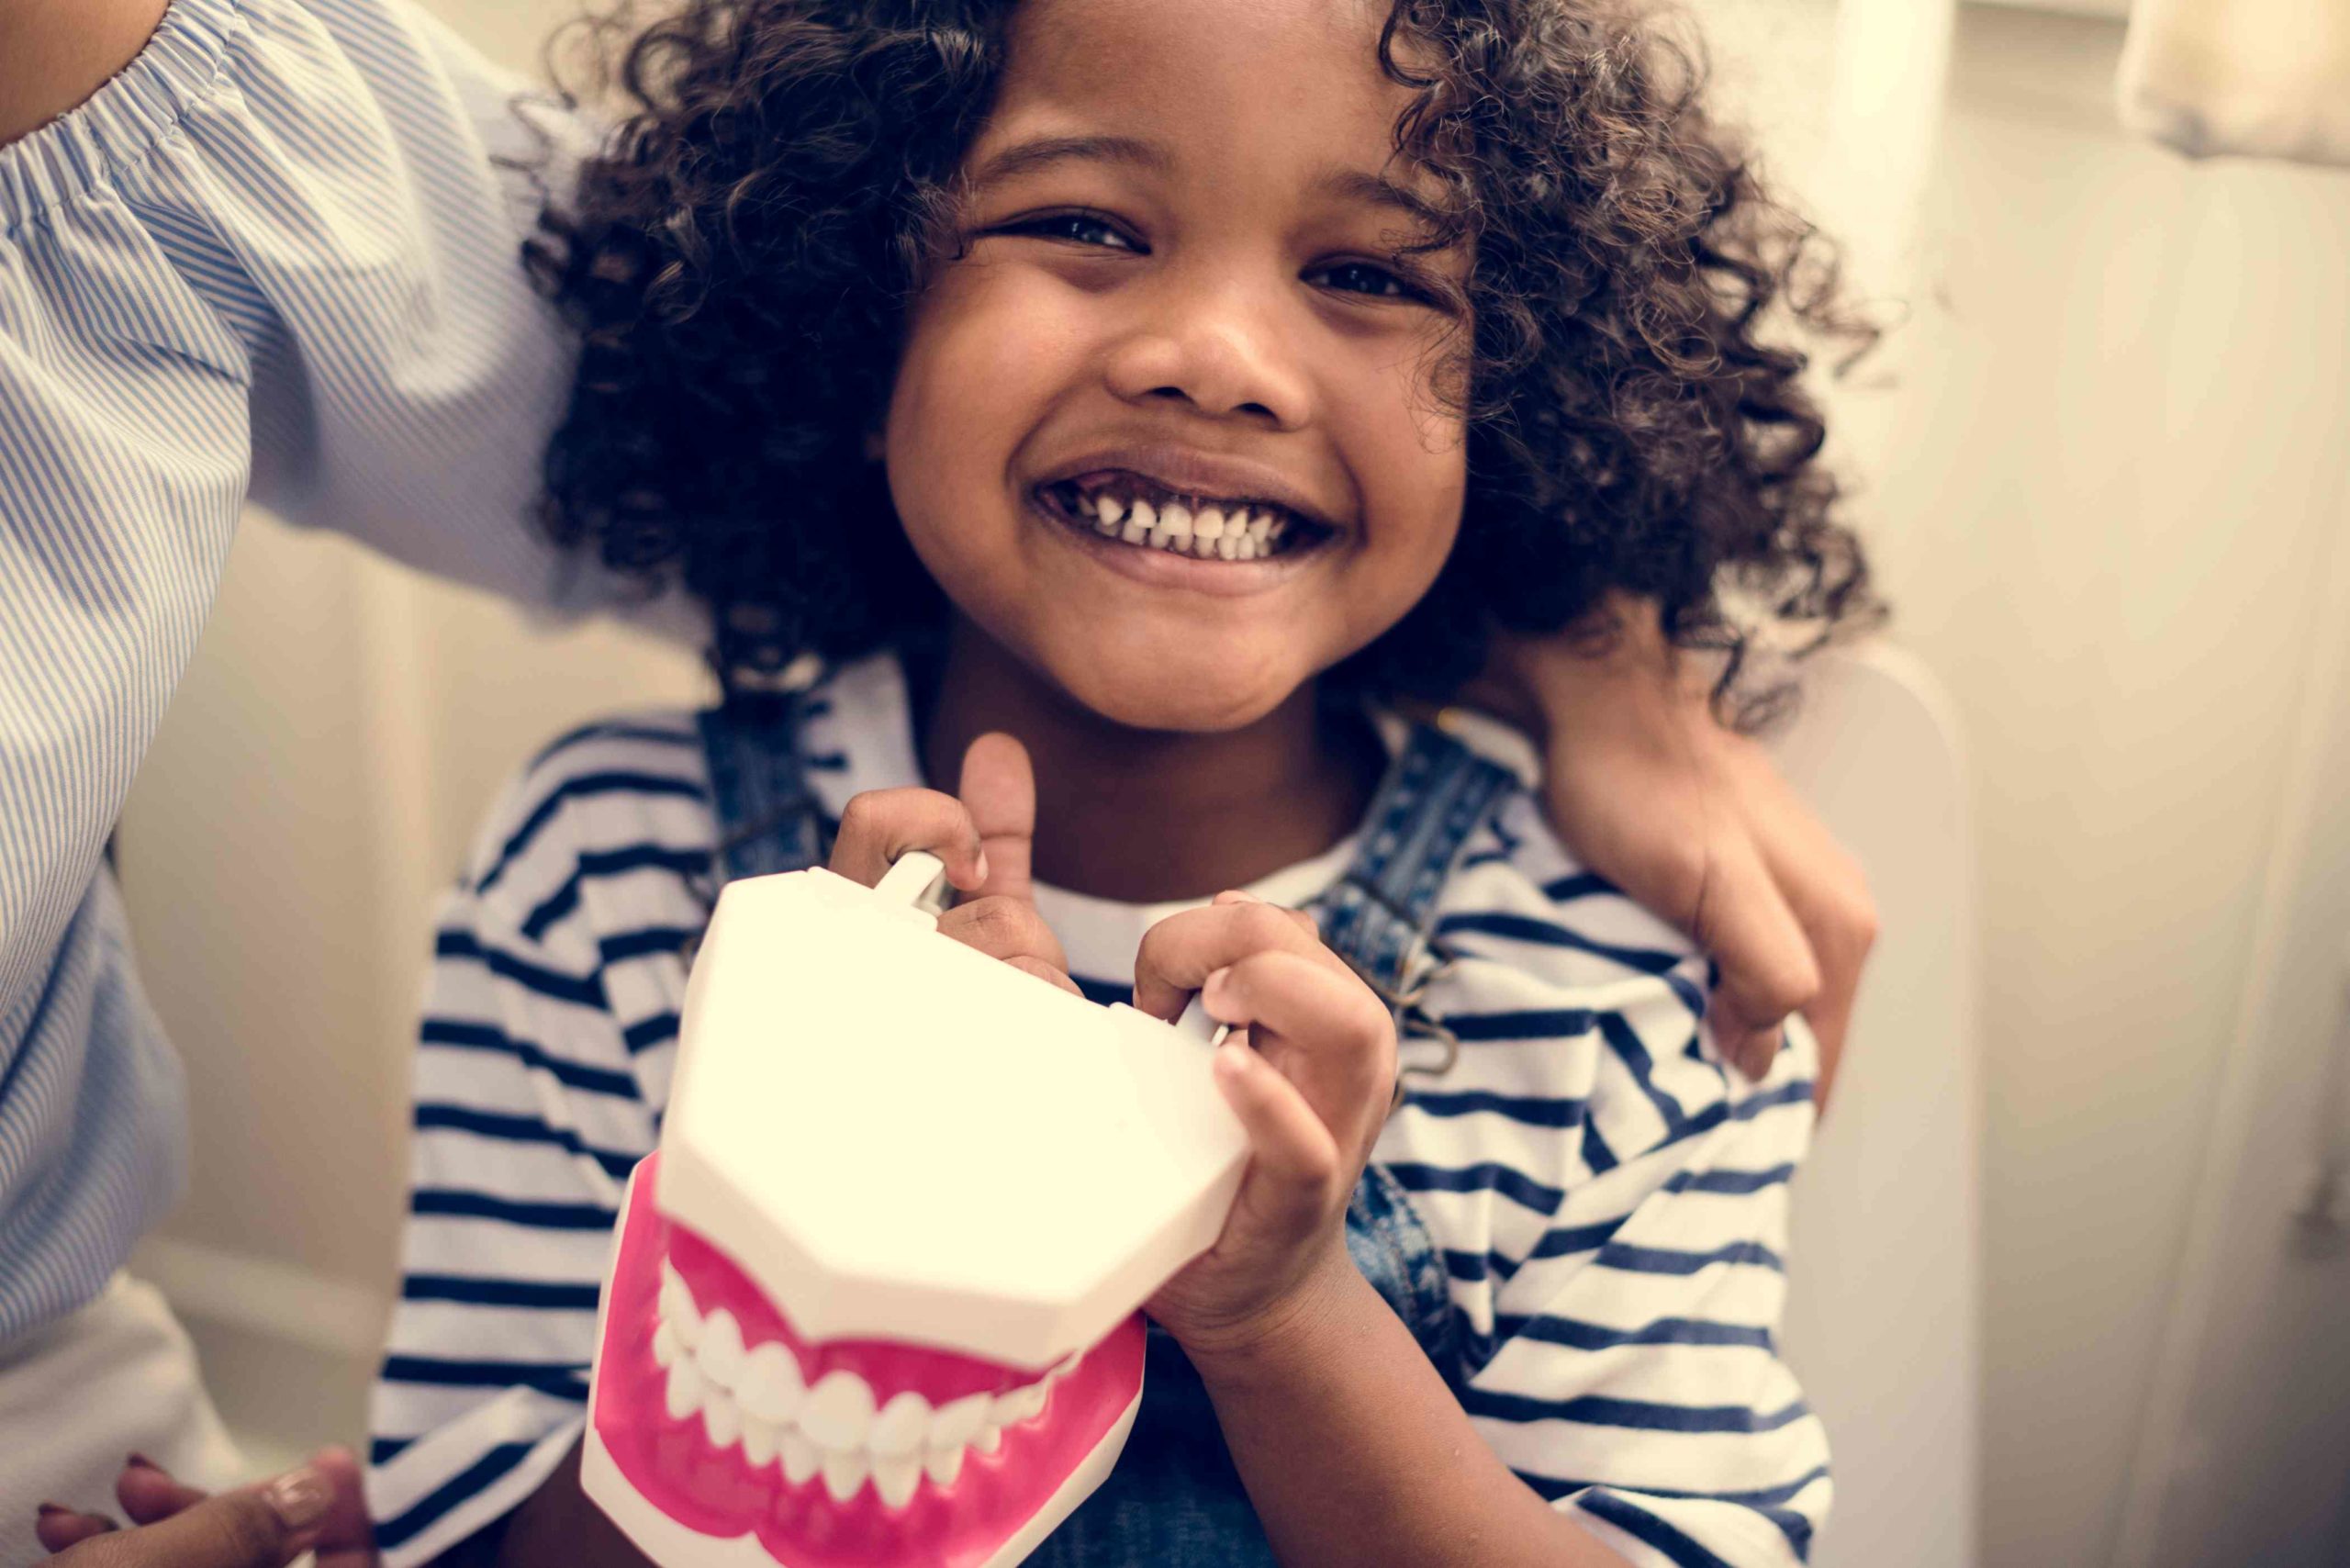 You are currently viewing Dentistry For Children: What Types Of Treatments Do Pediatric Dentists Provide?